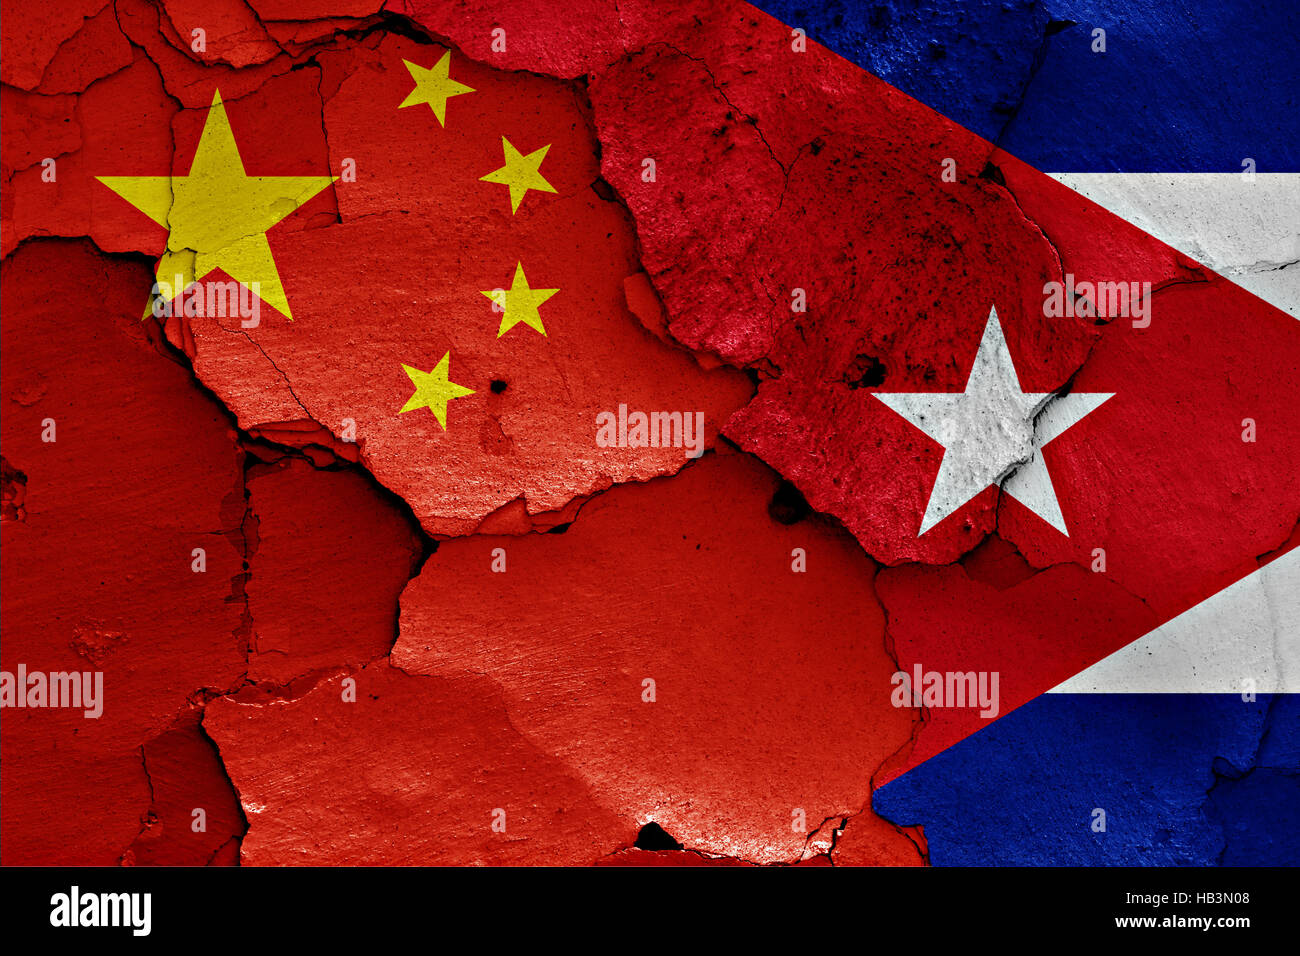 flags of China and Cuba painted on cracked wall Stock Photo